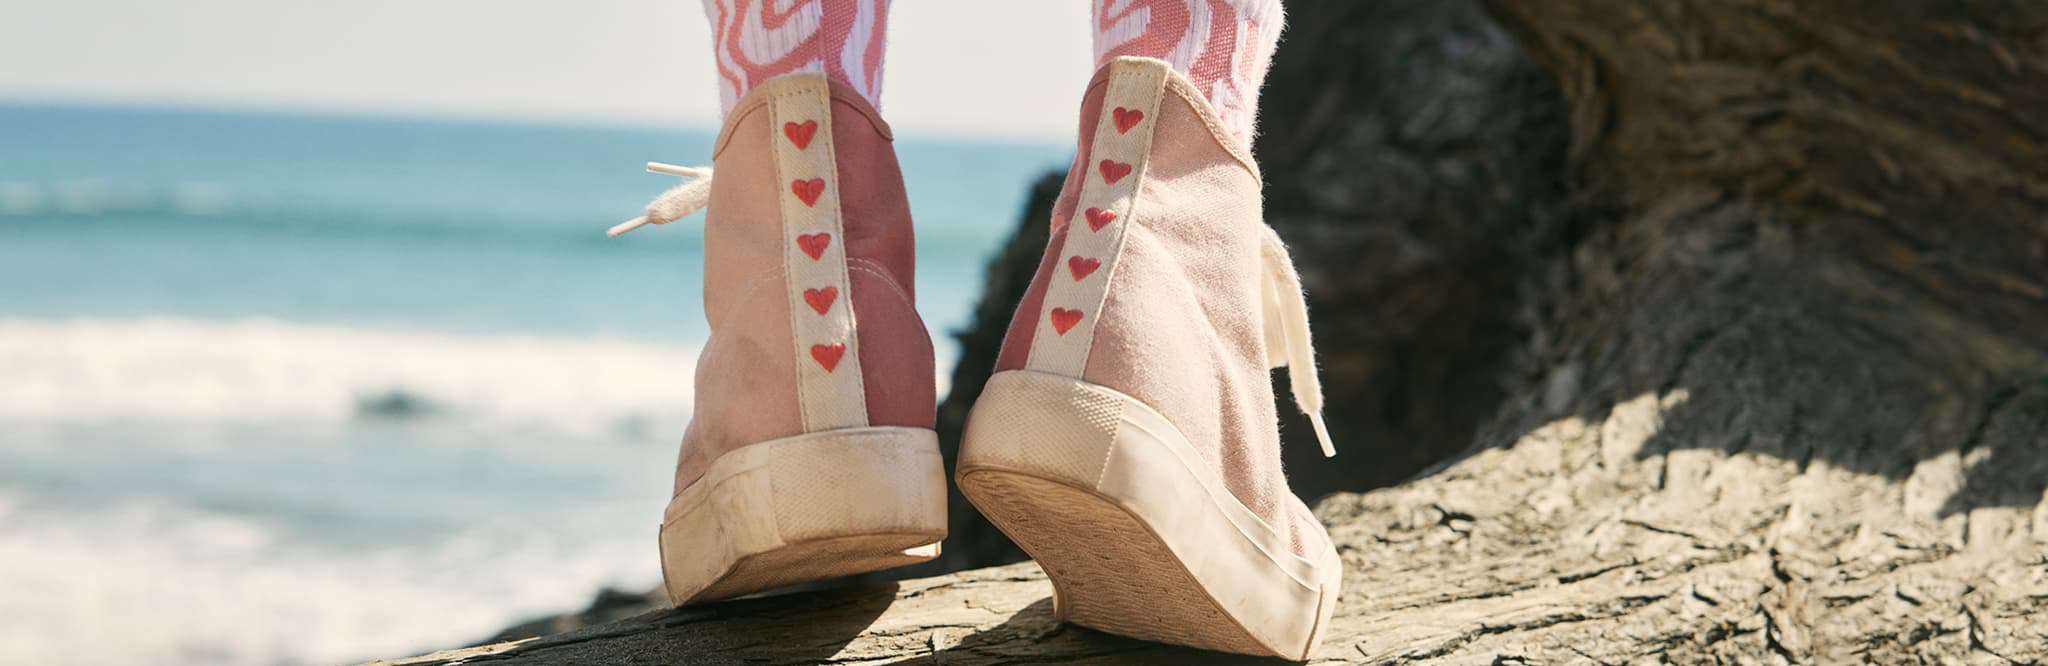 pink shoes with hearts on t